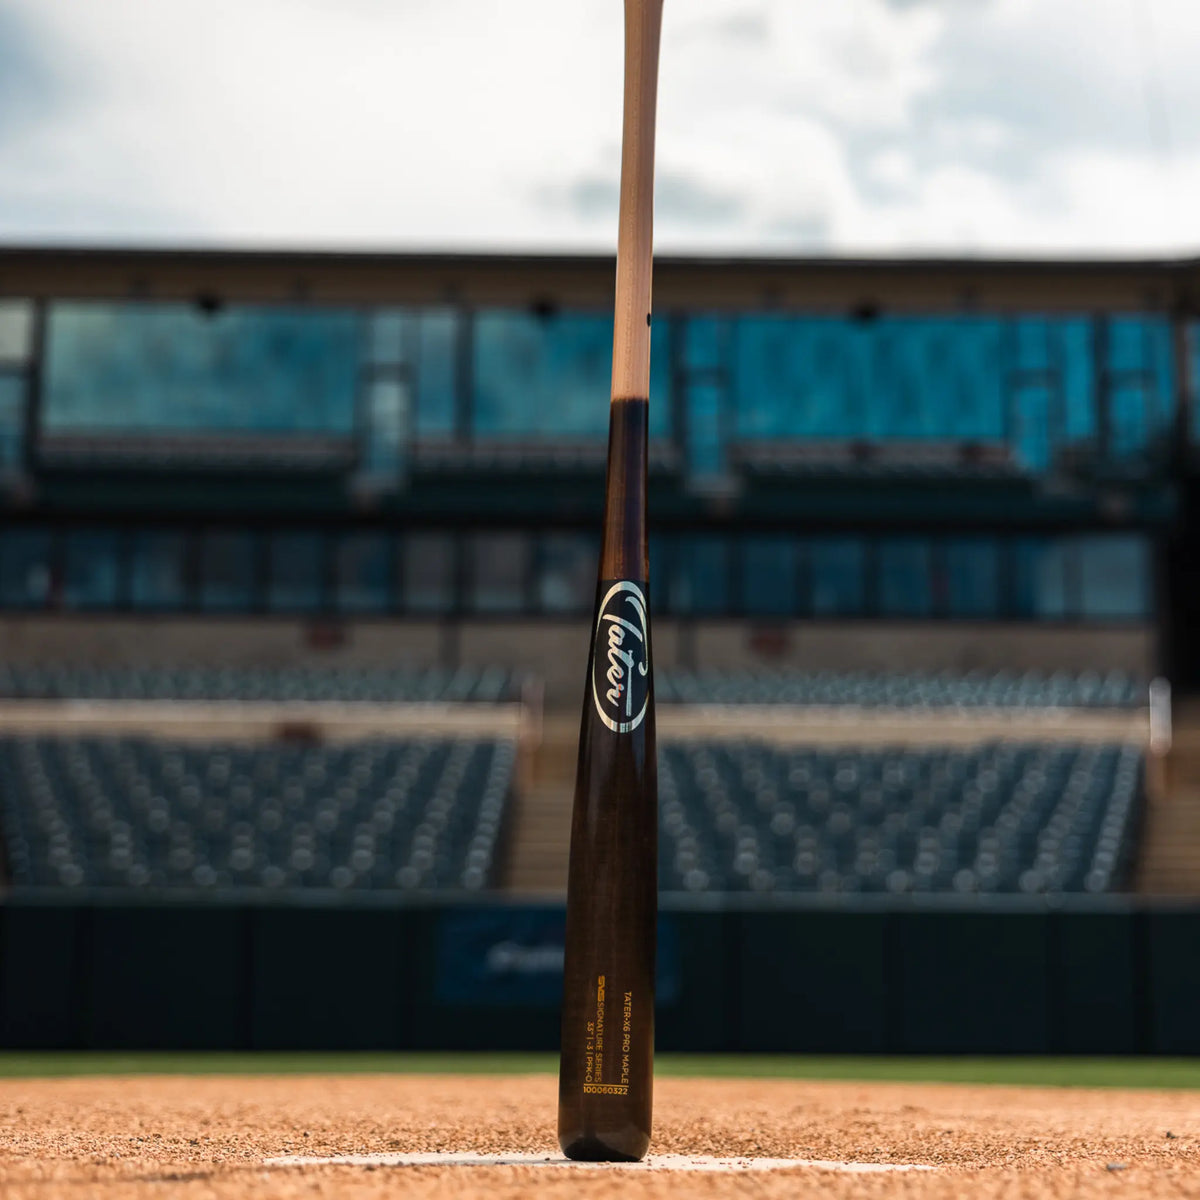 Tater Baseball&#39;s top-rated maple wood bat for hitters, standing at home plate in an empty baseball field, a preferred choice for players seeking alternatives to Louisville Slugger.